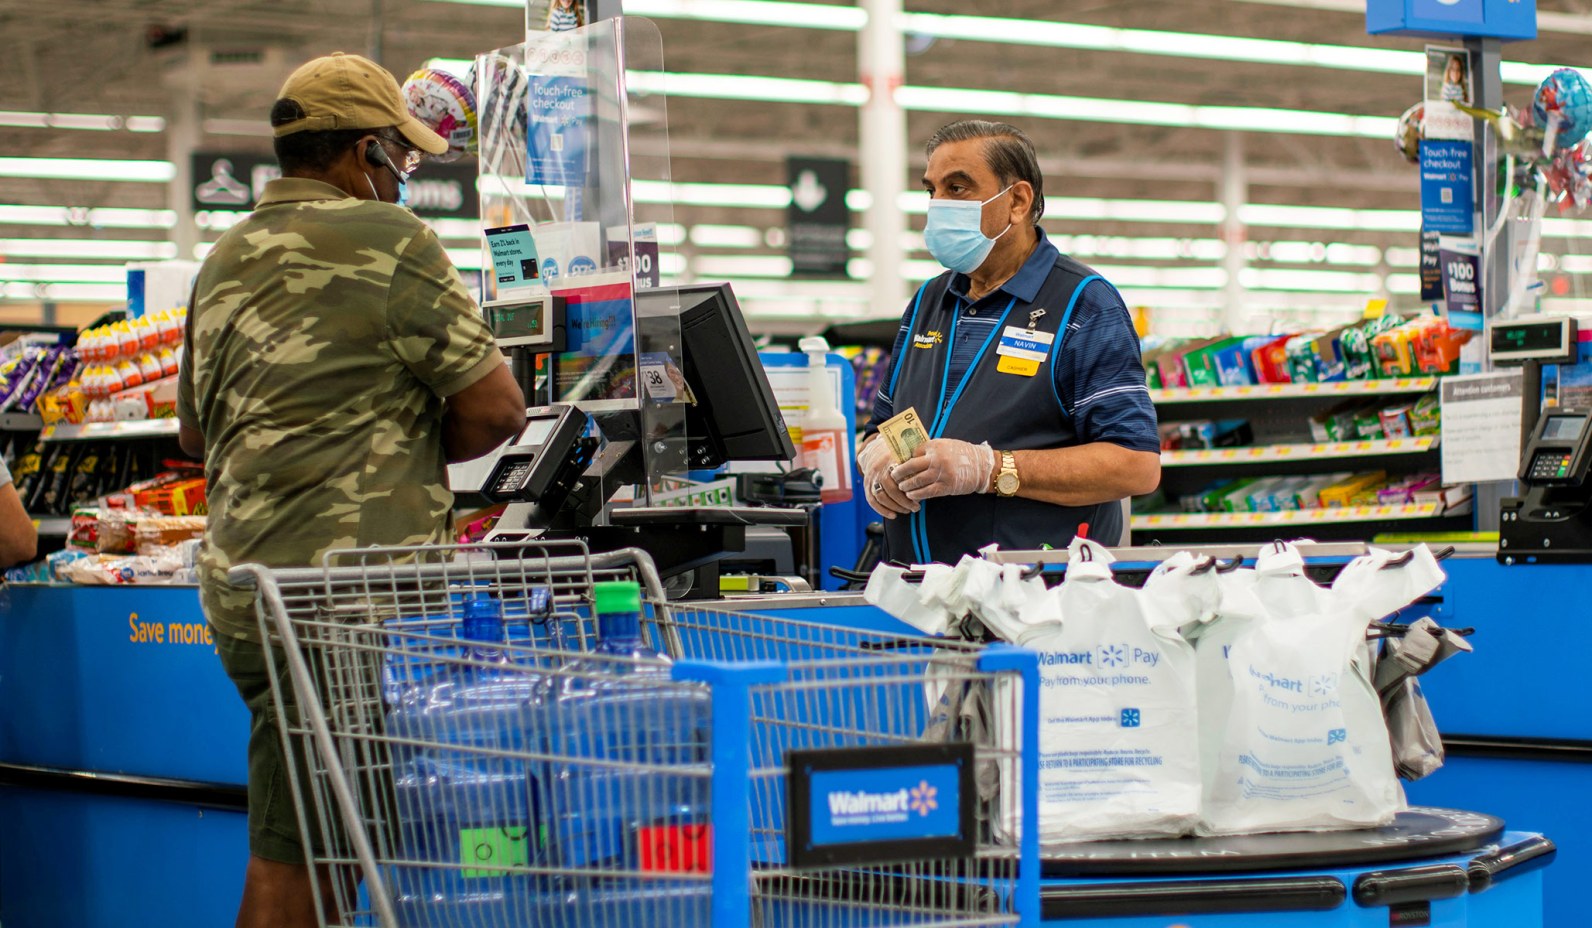 wal-mart - check out - employee & customer